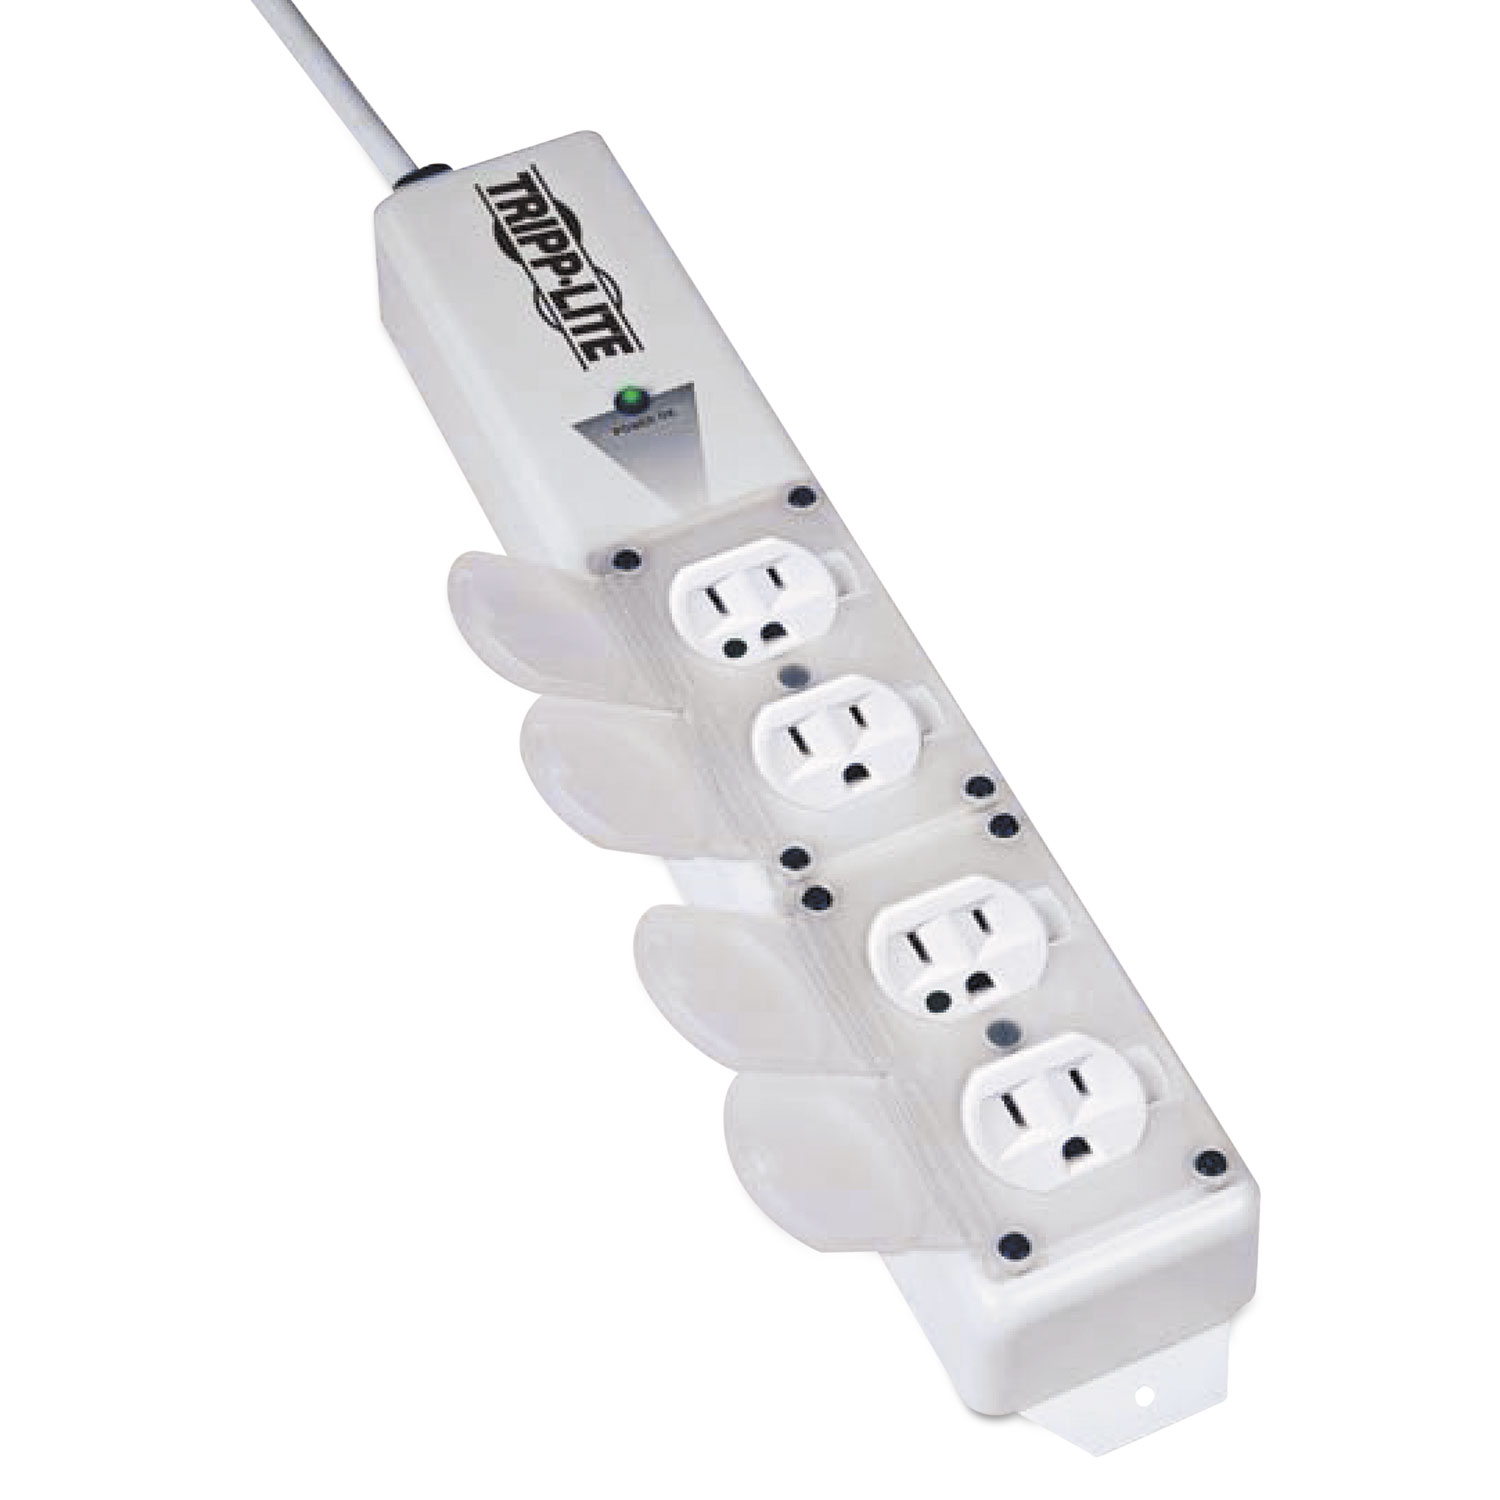 Medical-Grade Power Strip for Patient-Care Vicinity, 4 Outlets, 15 ft. Cord